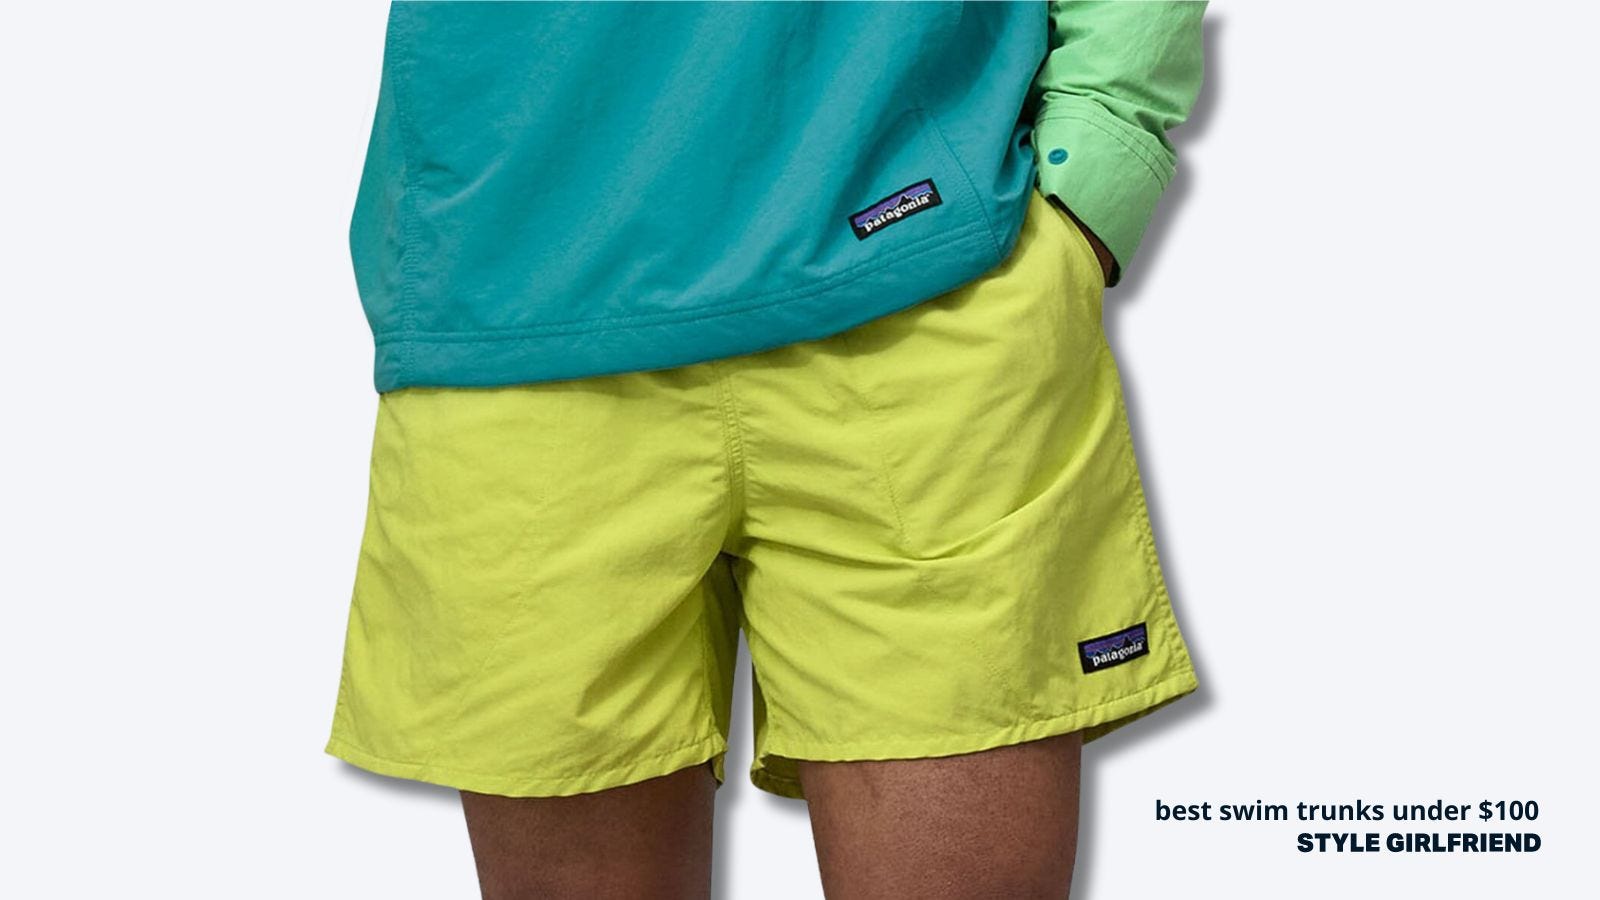 close-up of fluorescent yellow men's swim trunks, paired with a patagonia green fleece. text on-screen reads: best swim trunks under $100, style girlfriend